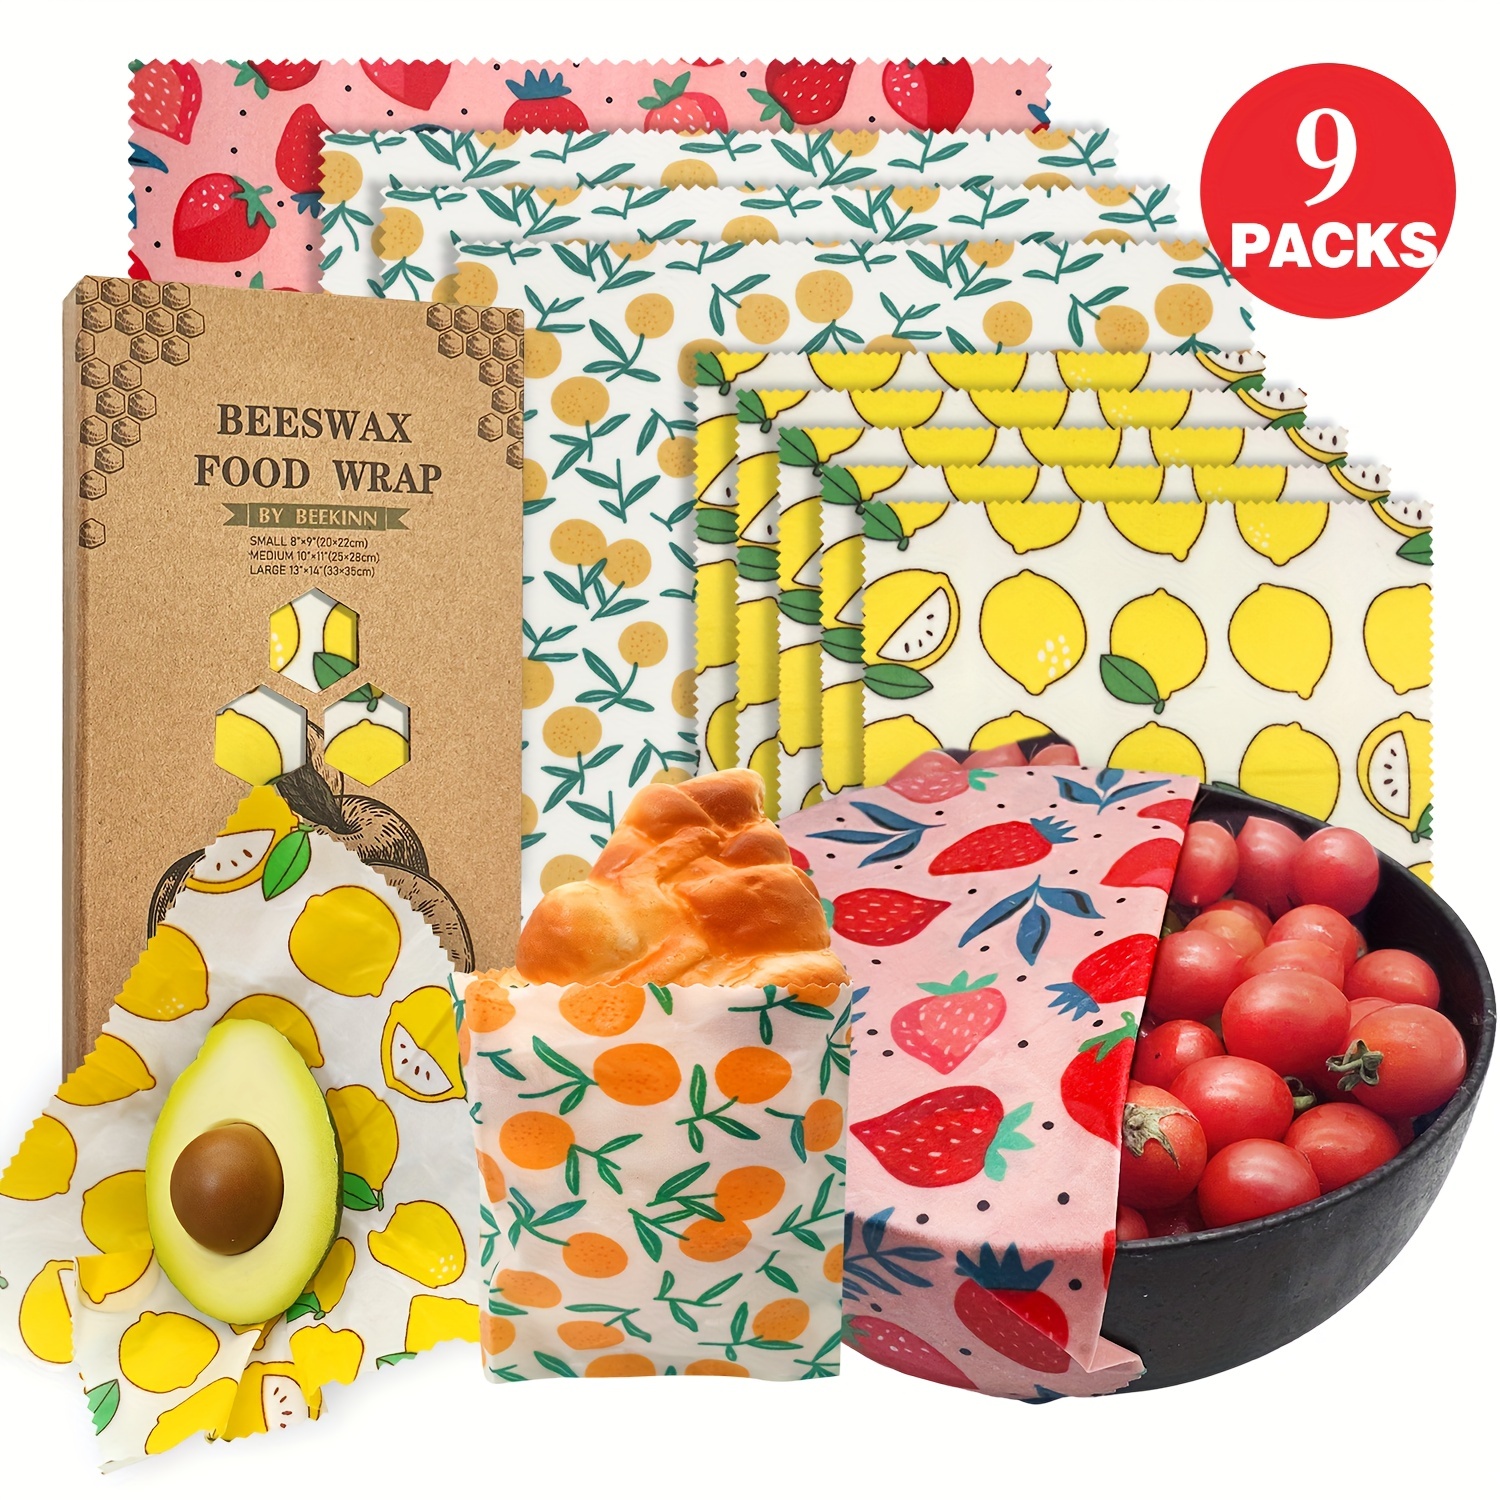  Beeswax Wrap, 3 Pack Reusable Food Wrap Beeswax Wraps for Food  Storage Organic Beeswax Food Wraps Beeswax Paper Wax Wraps Wax Covers  Beeswax Lunch Wrap Sandwich Wrappers 1L, 1M, 1S Strawberry